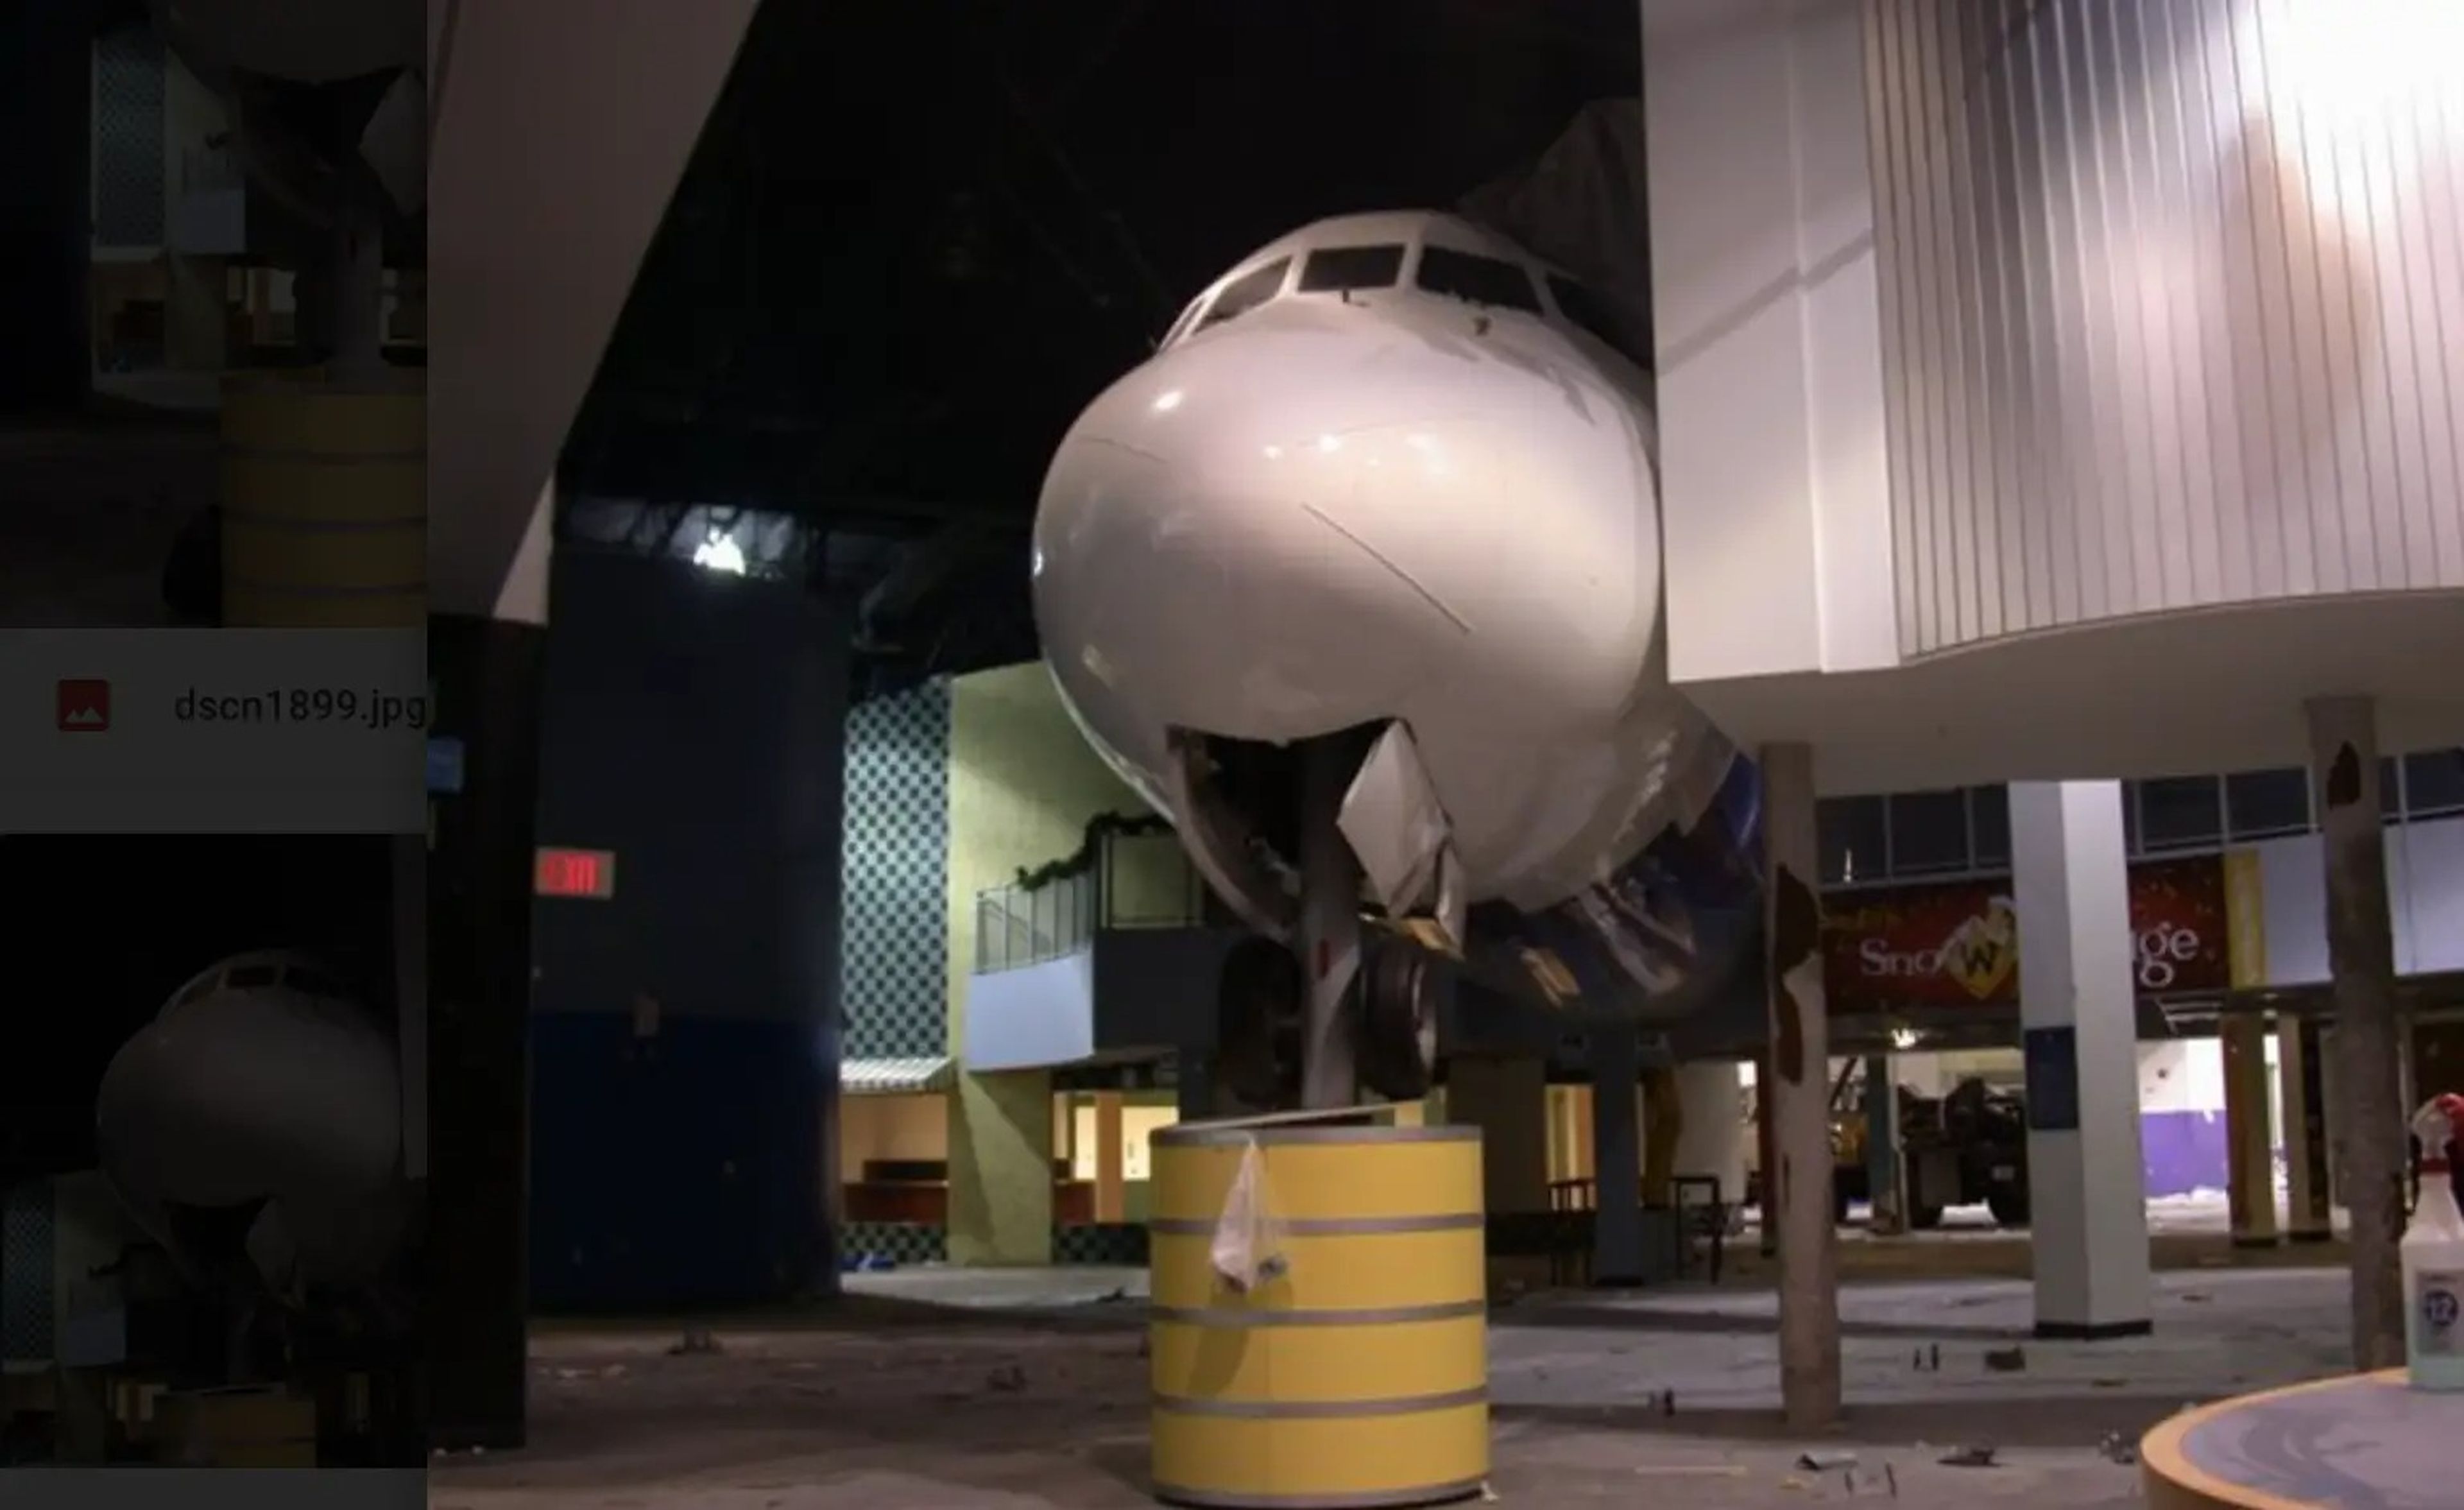 The DC-9 Spirit Airlines plane inside a derelict mall in Florida where it was being used as a display.